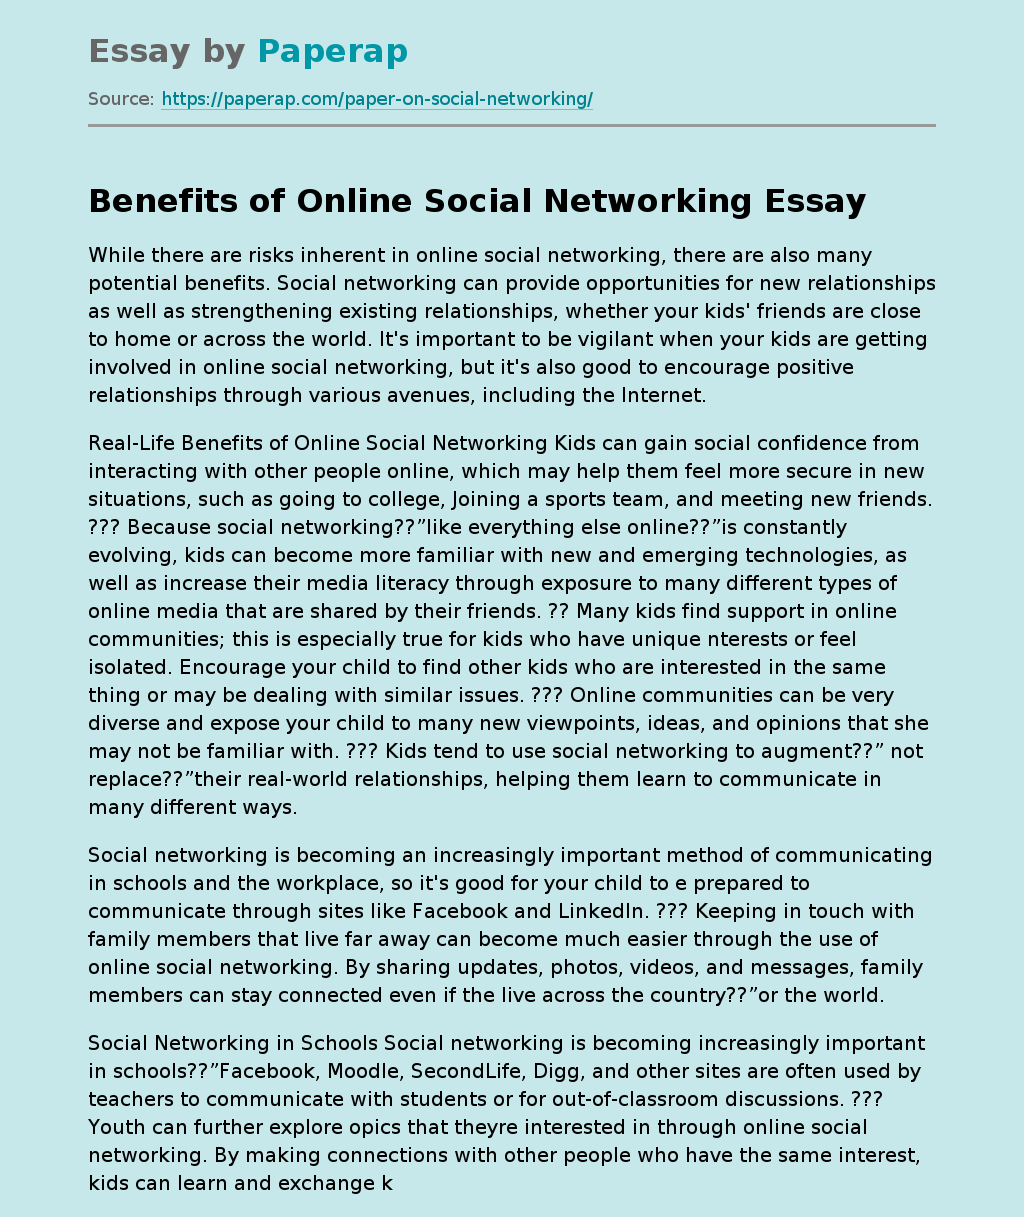 Benefits of Online Social Networking